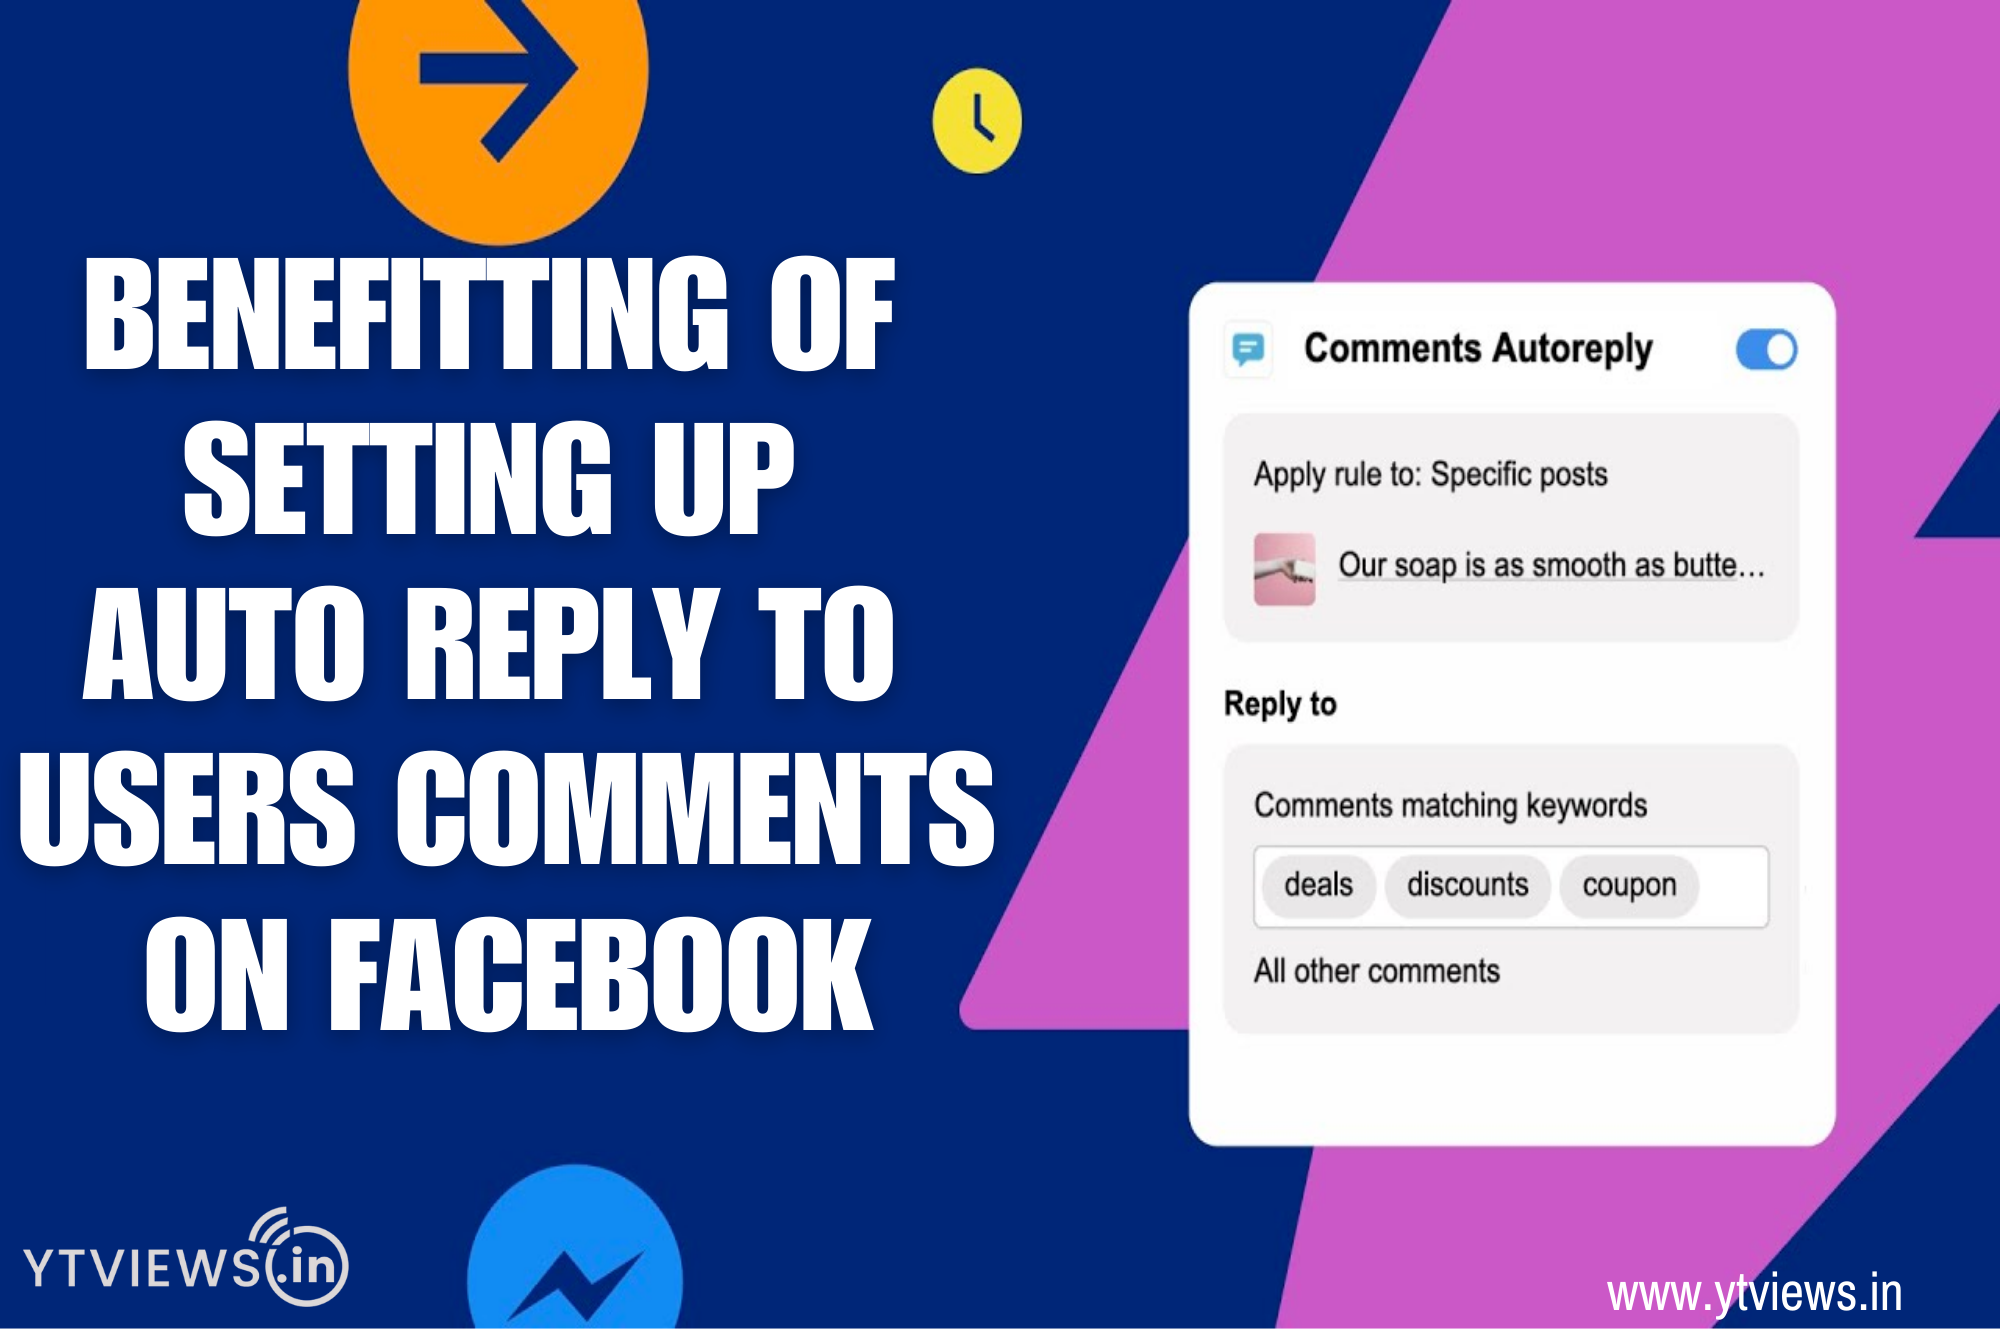 Benefits of setting up Auto Reply to users’ comments on Facebook